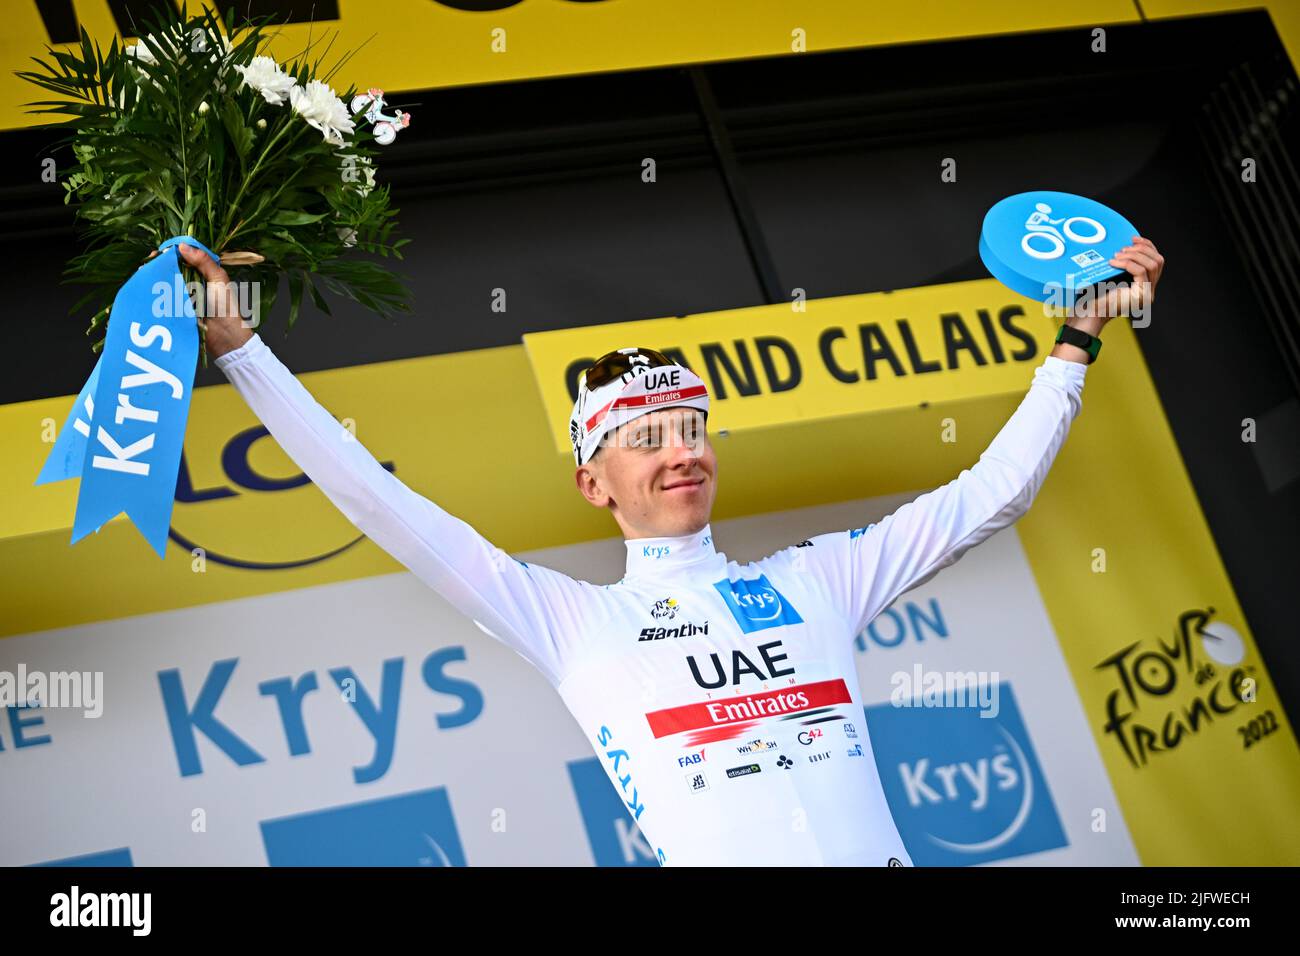 Calais, France,05 July 2022. Slovenian Tadej Pogacar of UAE Team Emirates celebrates in the white jersey for best young rider after stage four of the Tour de France cycling race, a 171.5 km race from Dunkerque to Calais, France on Tuesday 05 July 2022. This year's Tour de France takes place from 01 to 24 July 2022. BELGA PHOTO JASPER JACOBS - UK OUT Stock Photo